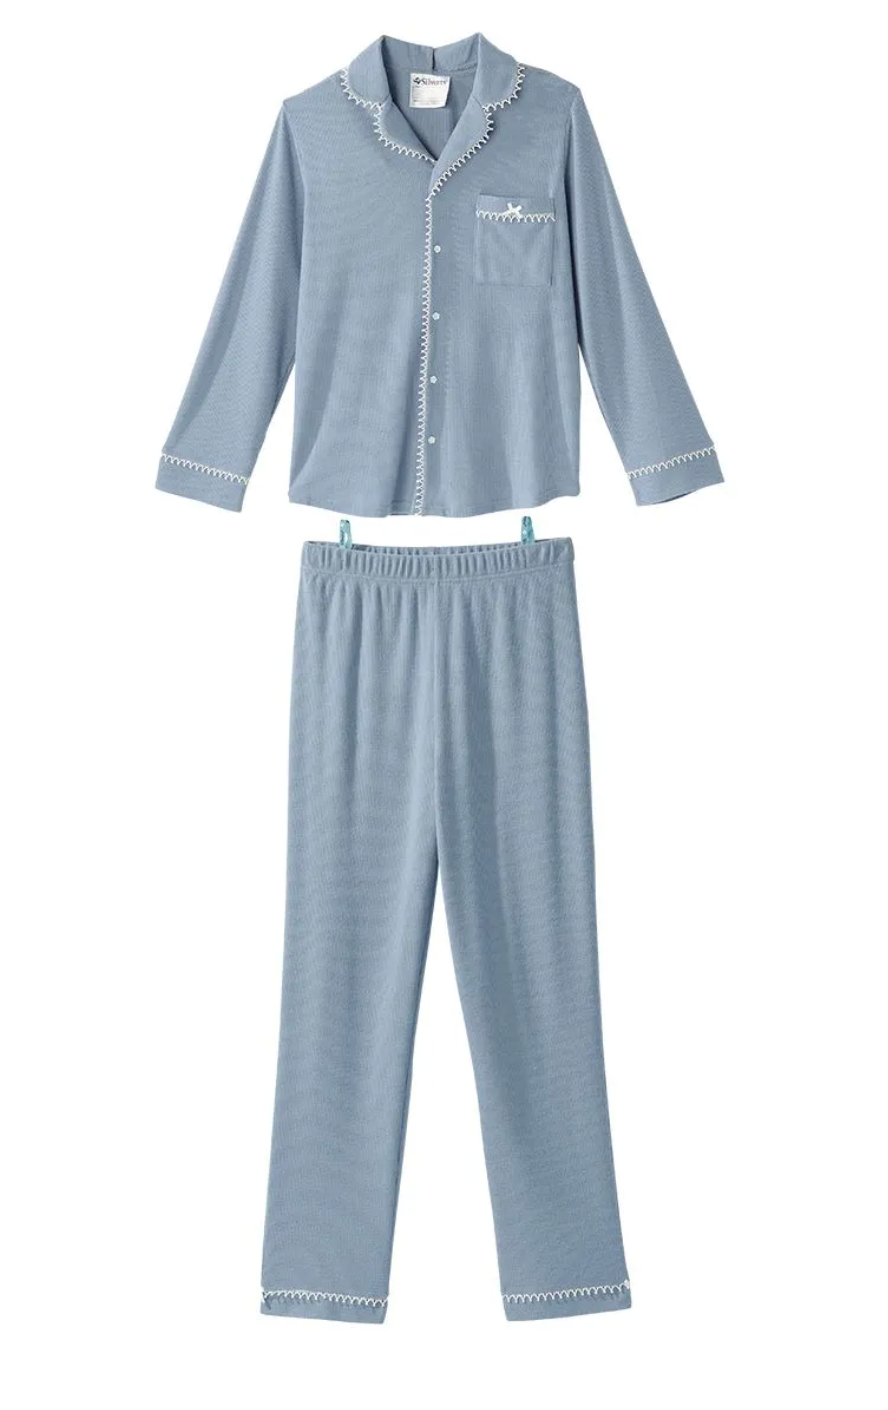 Women's Open Back Pajamas With Pull-On Pant Set | Art in Aging